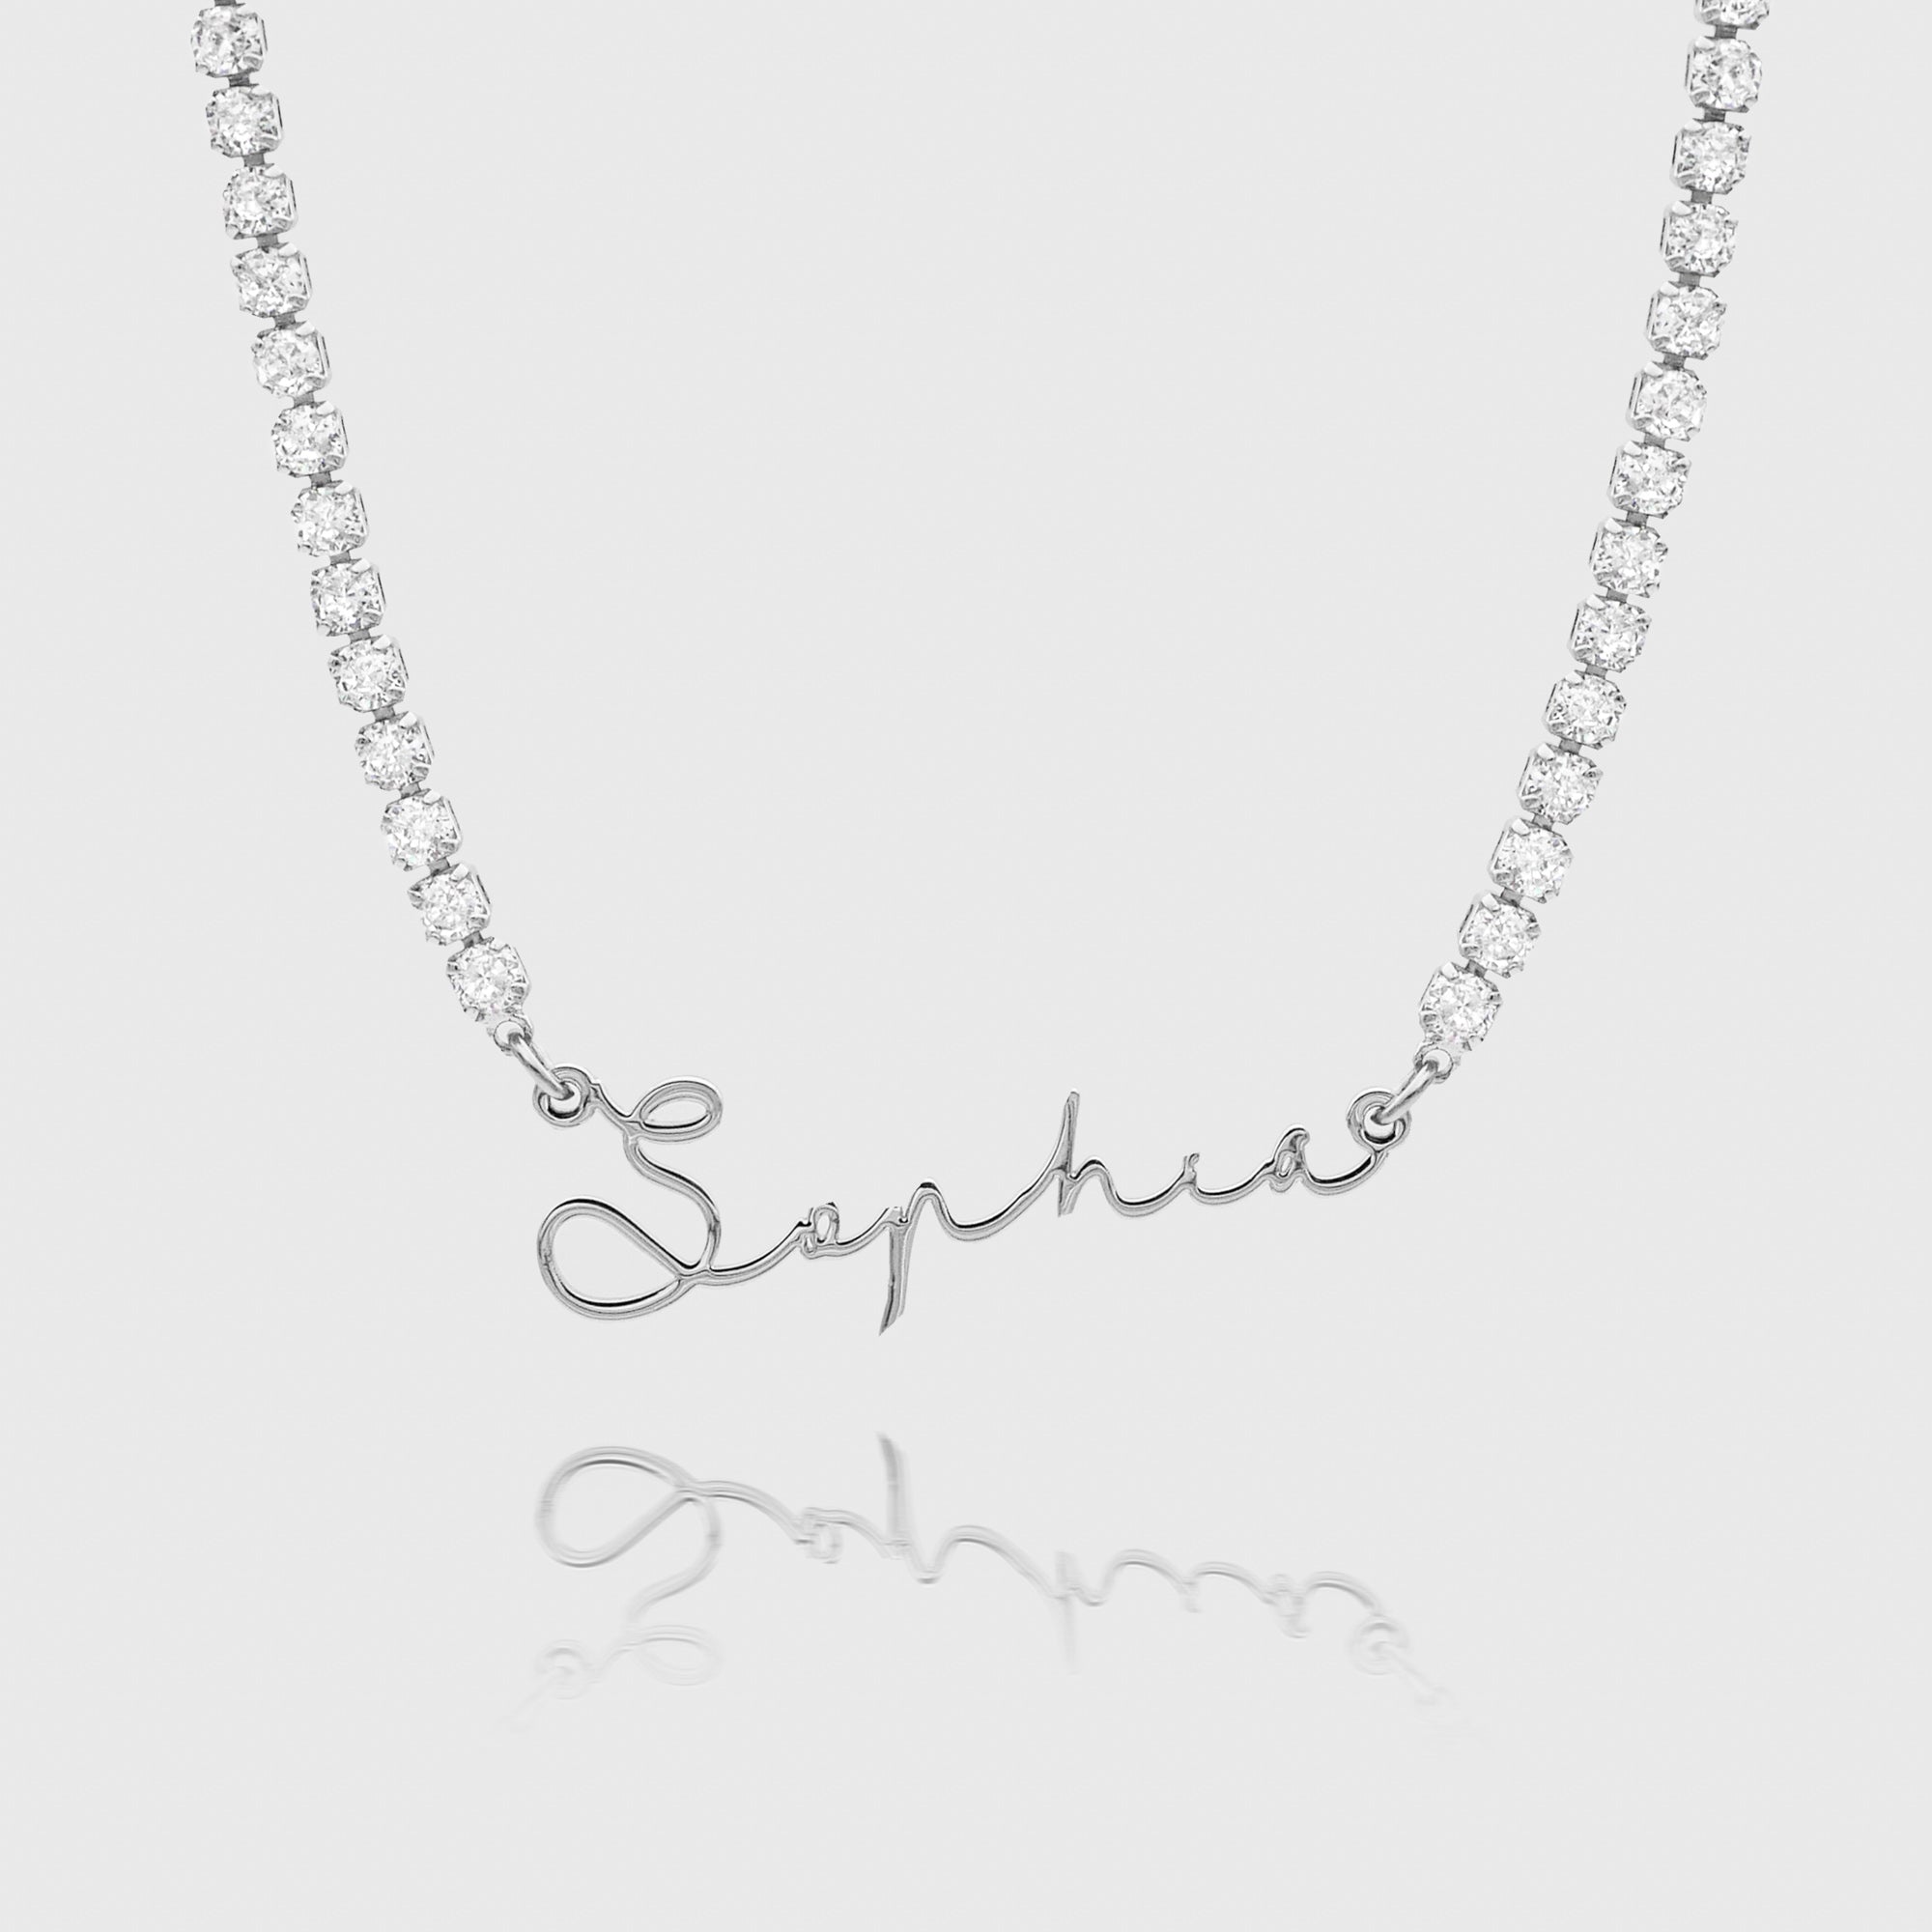 ICY Selina Name Necklace